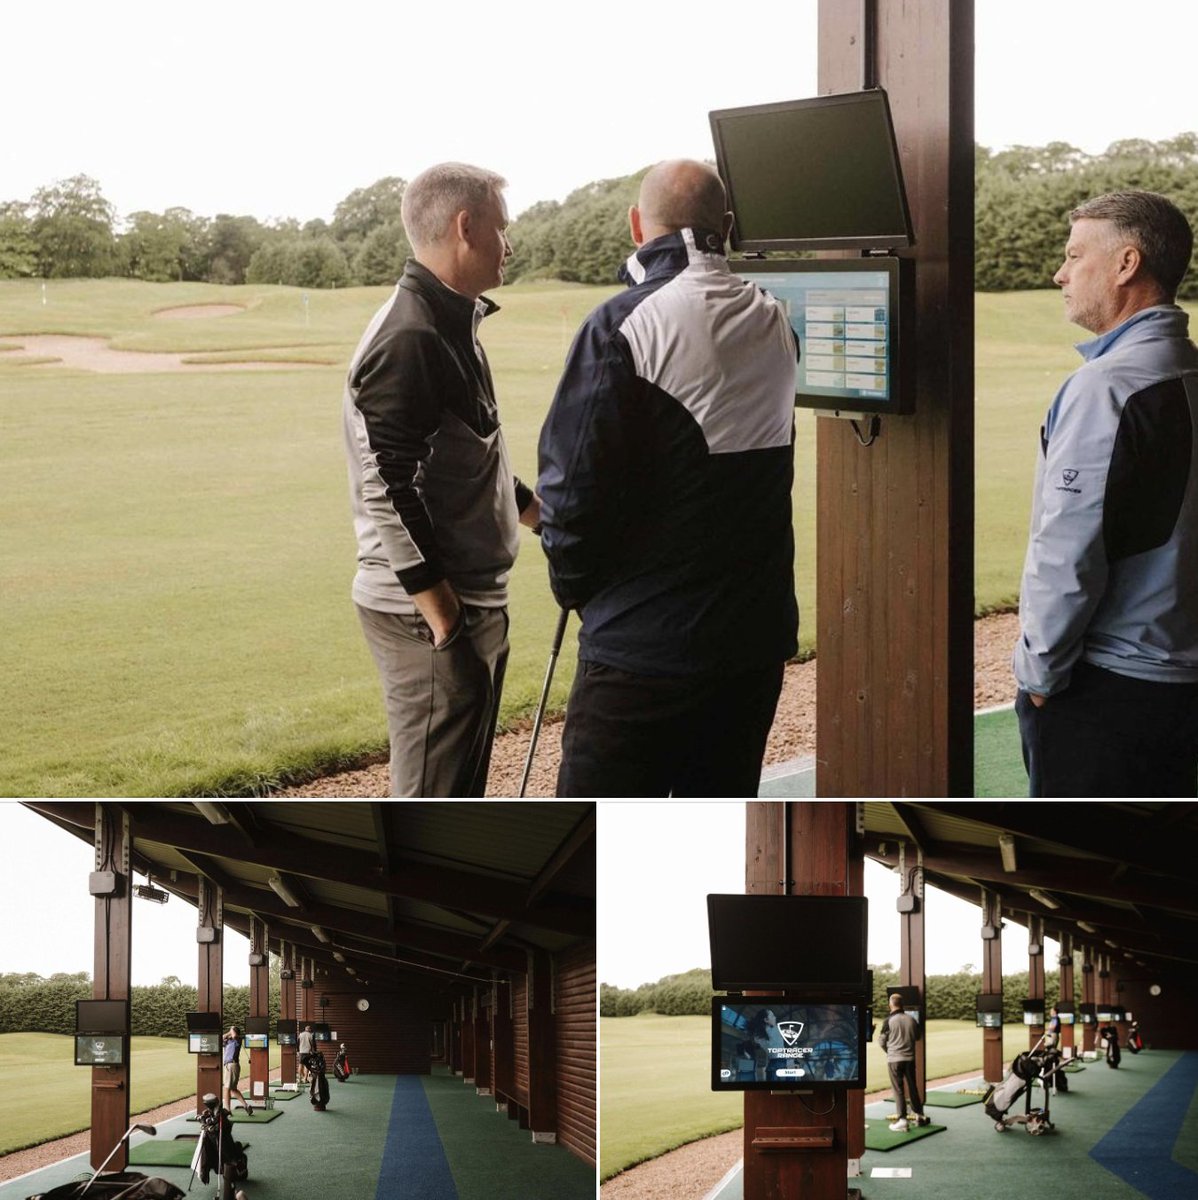 We are extremely proud to announce that we have invested in the latest @Toptracer technology in all 13 of our driving range bays. This is a great addition to our world-class practice facilities for our golf members and hotel guests. #toptracerrange #toptracer